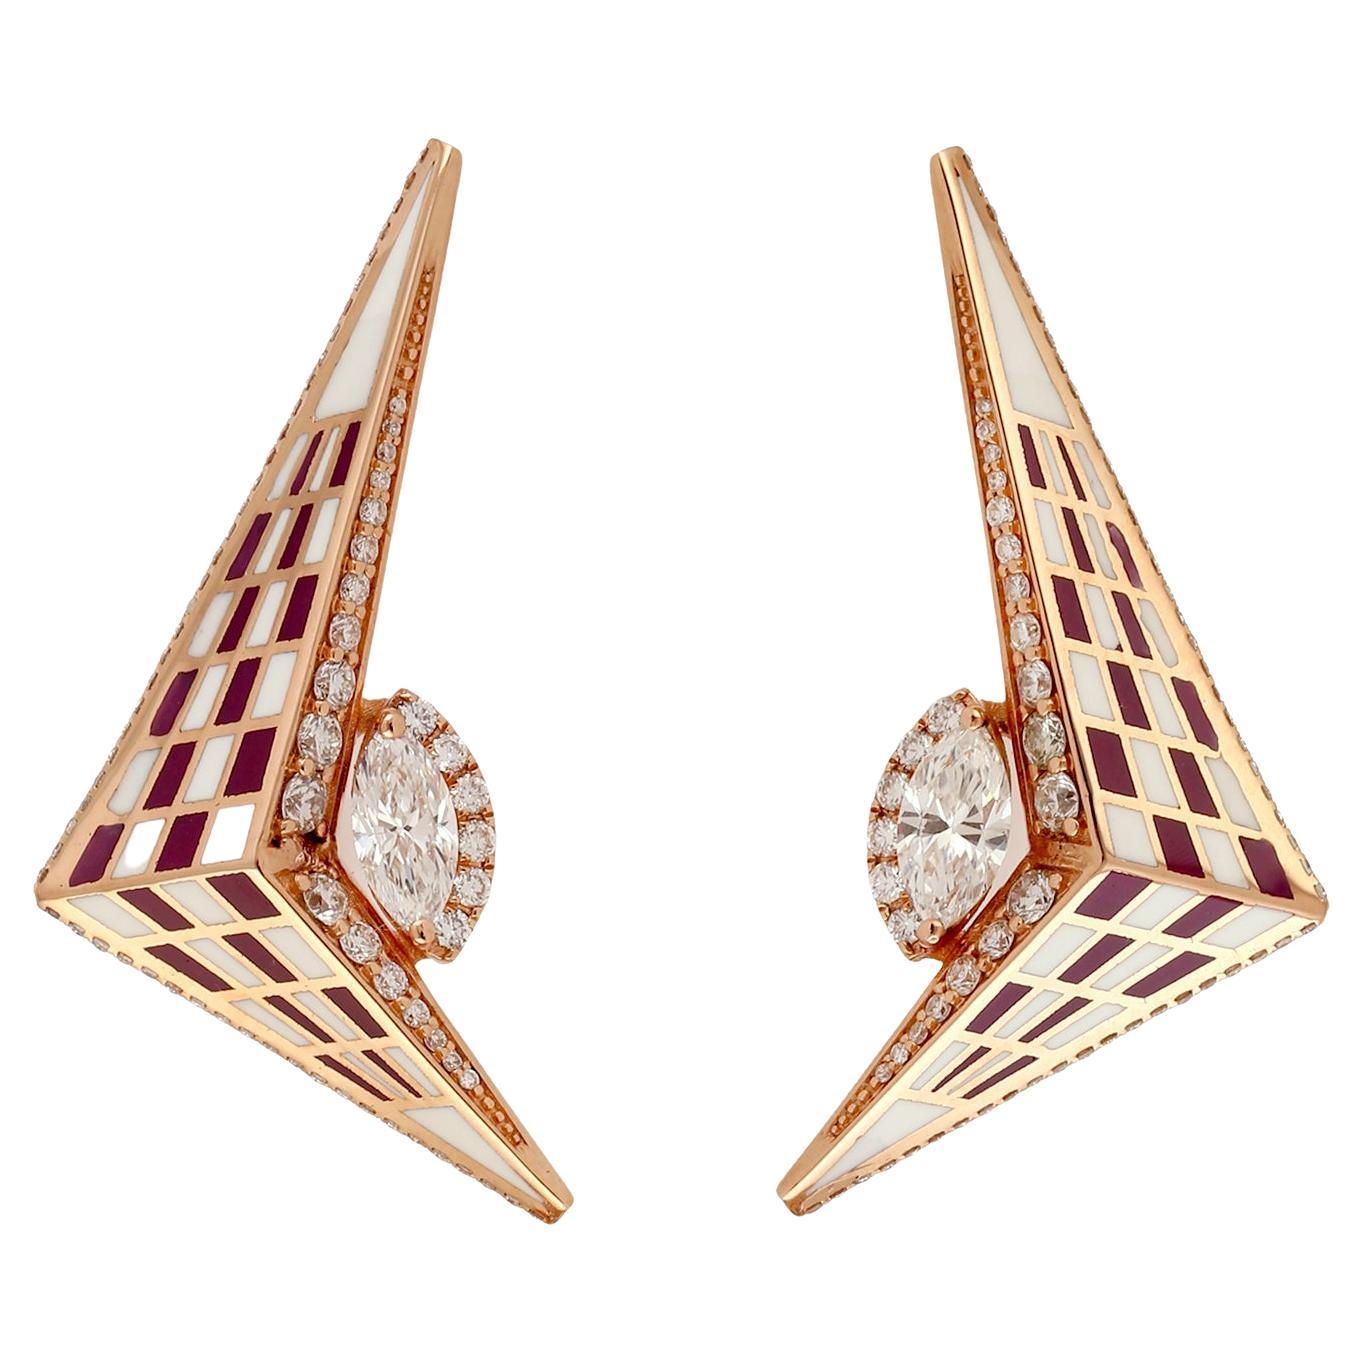 Three Dimensional Arrow Shaped Yellow Gold Earring with Center Marquise Diamond